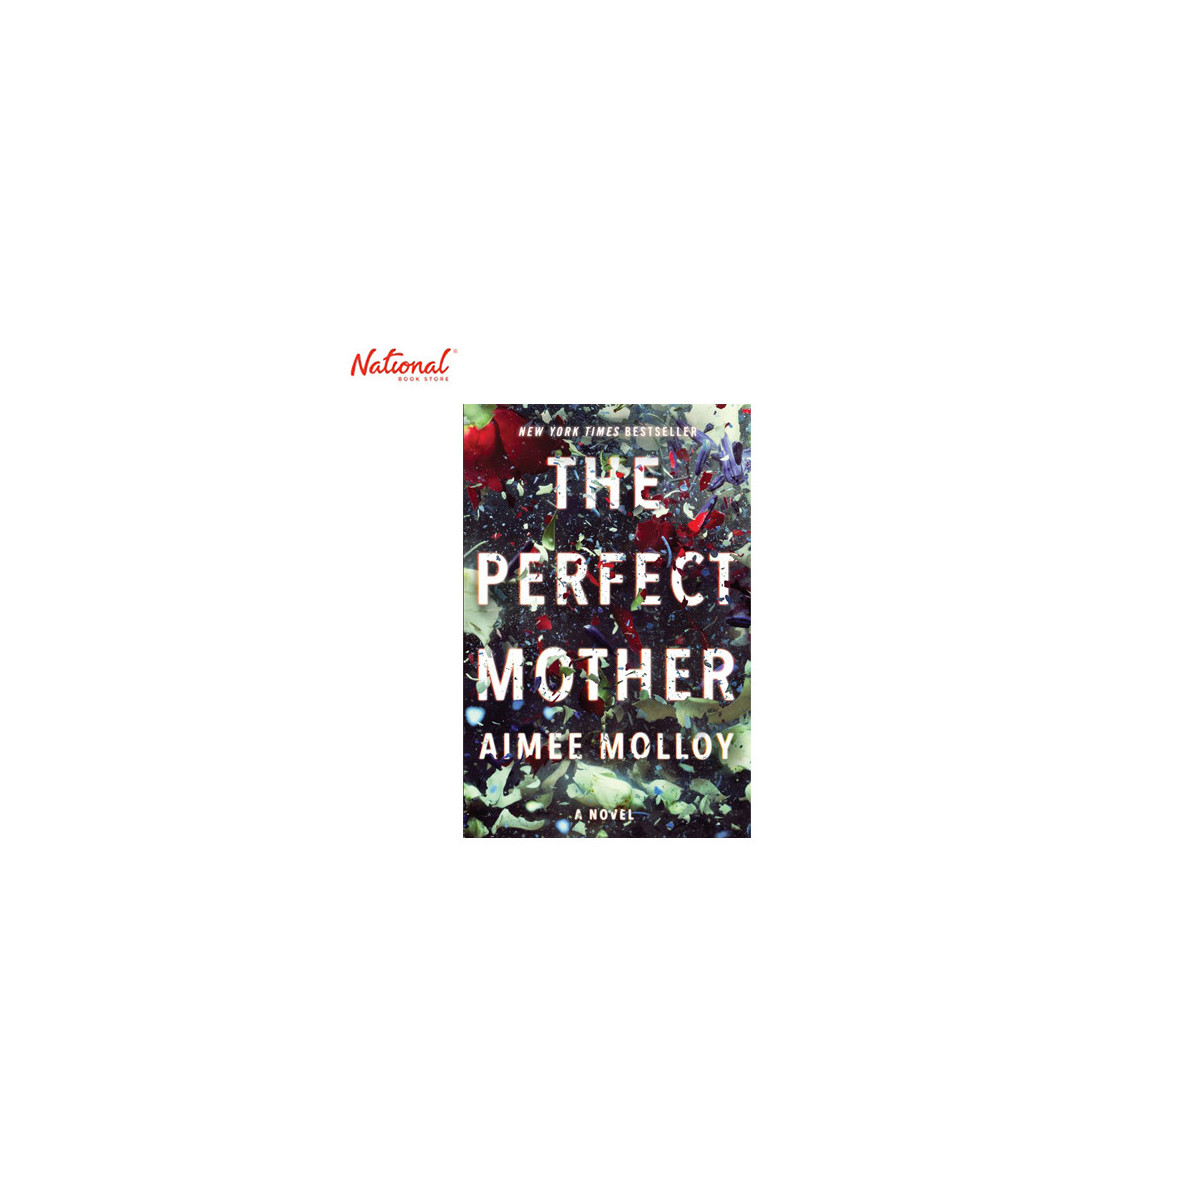 The Perfect Mother Hardcover by Aimee Molloy